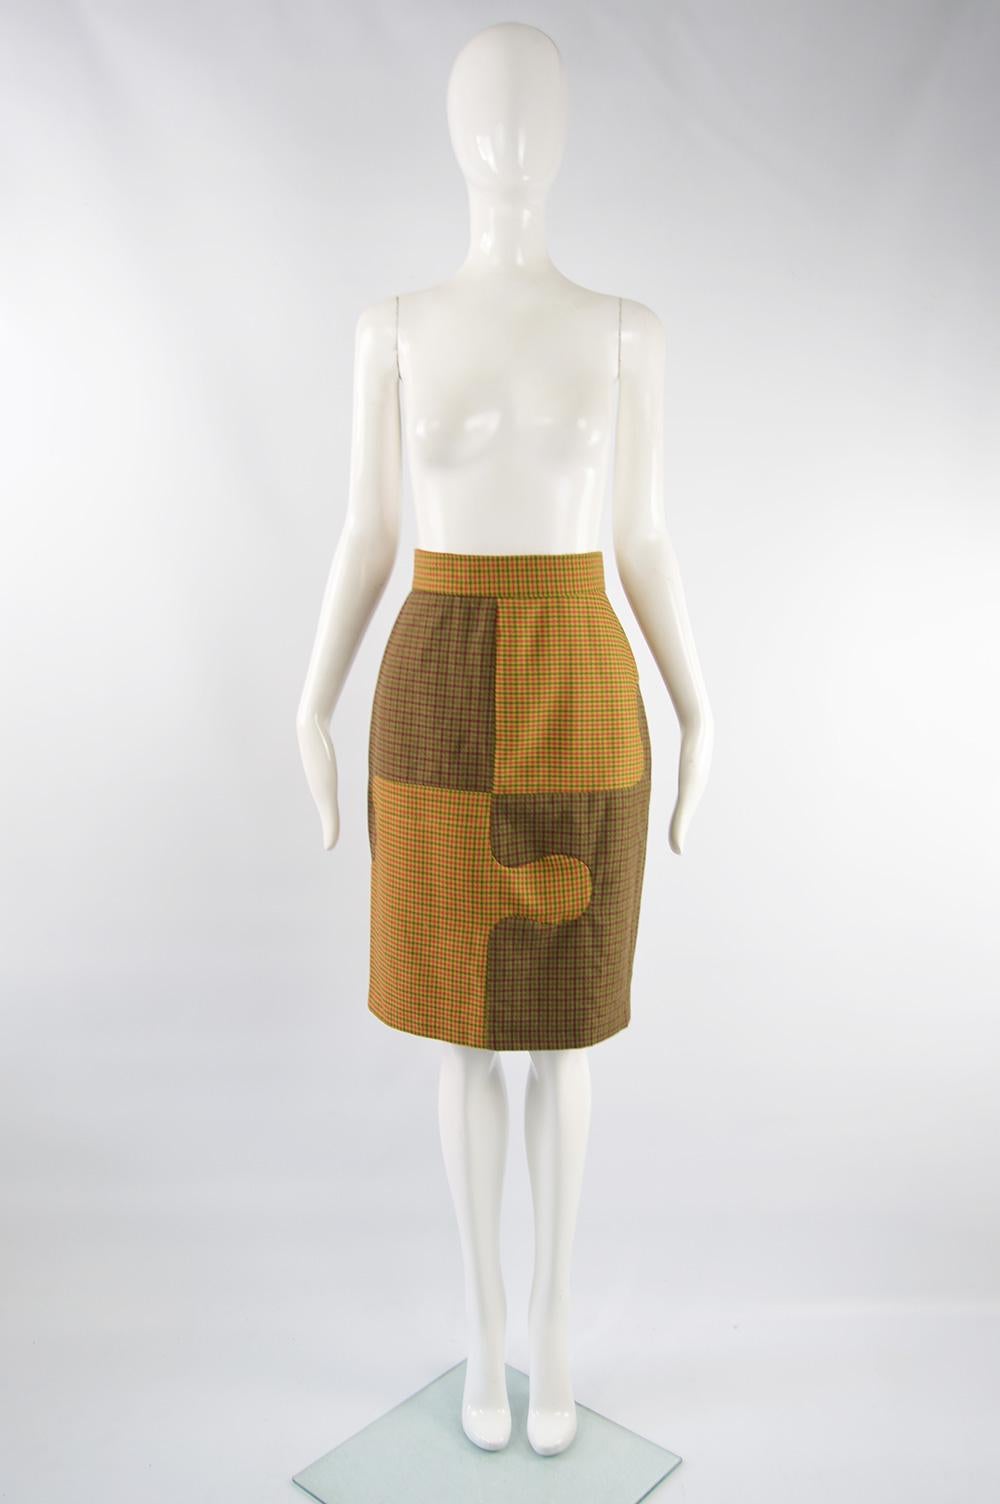 A fabulous vintage women's Moschino skirt from the late 80s. Made in Italy, in two contrasting plaid check wool fabrics with Moschino's iconic Cheap & Chic heart logo on the button. Perfect for spring / autumn or for wearing in the office. 
Size: